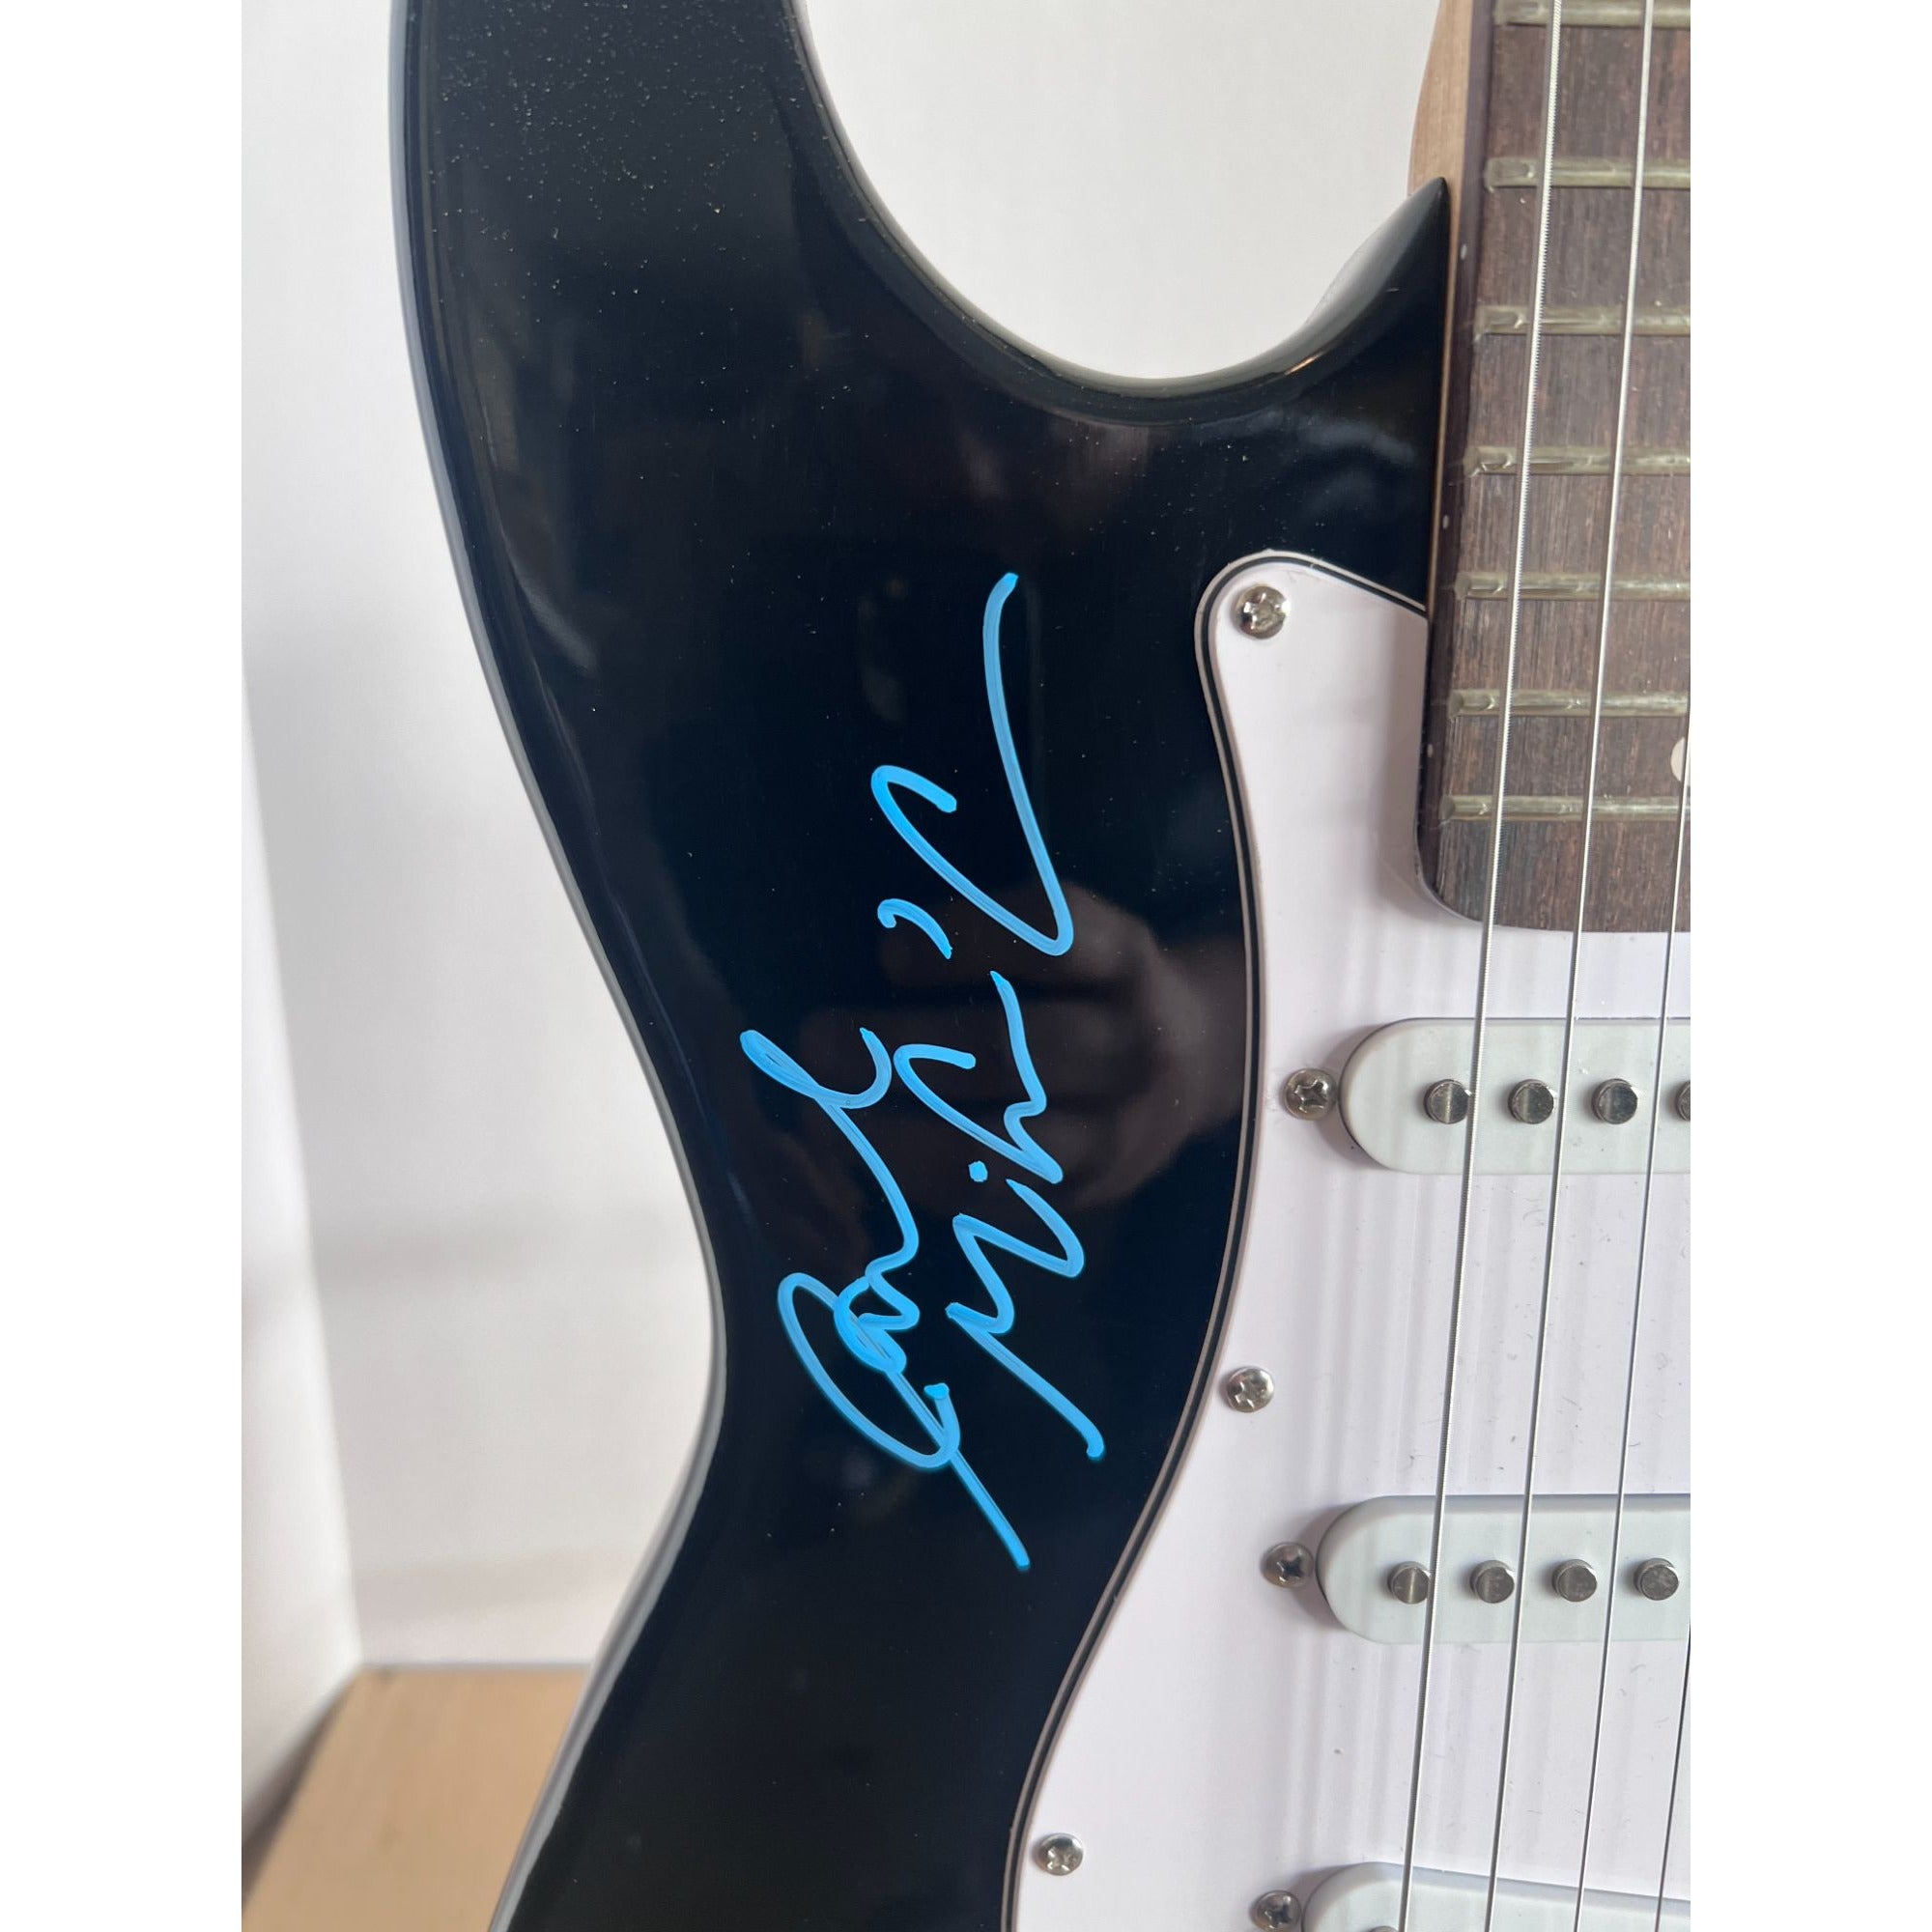 Noel & Liam Gallagher Oasis One-of-a-Kind full size electric guitar signed with proof